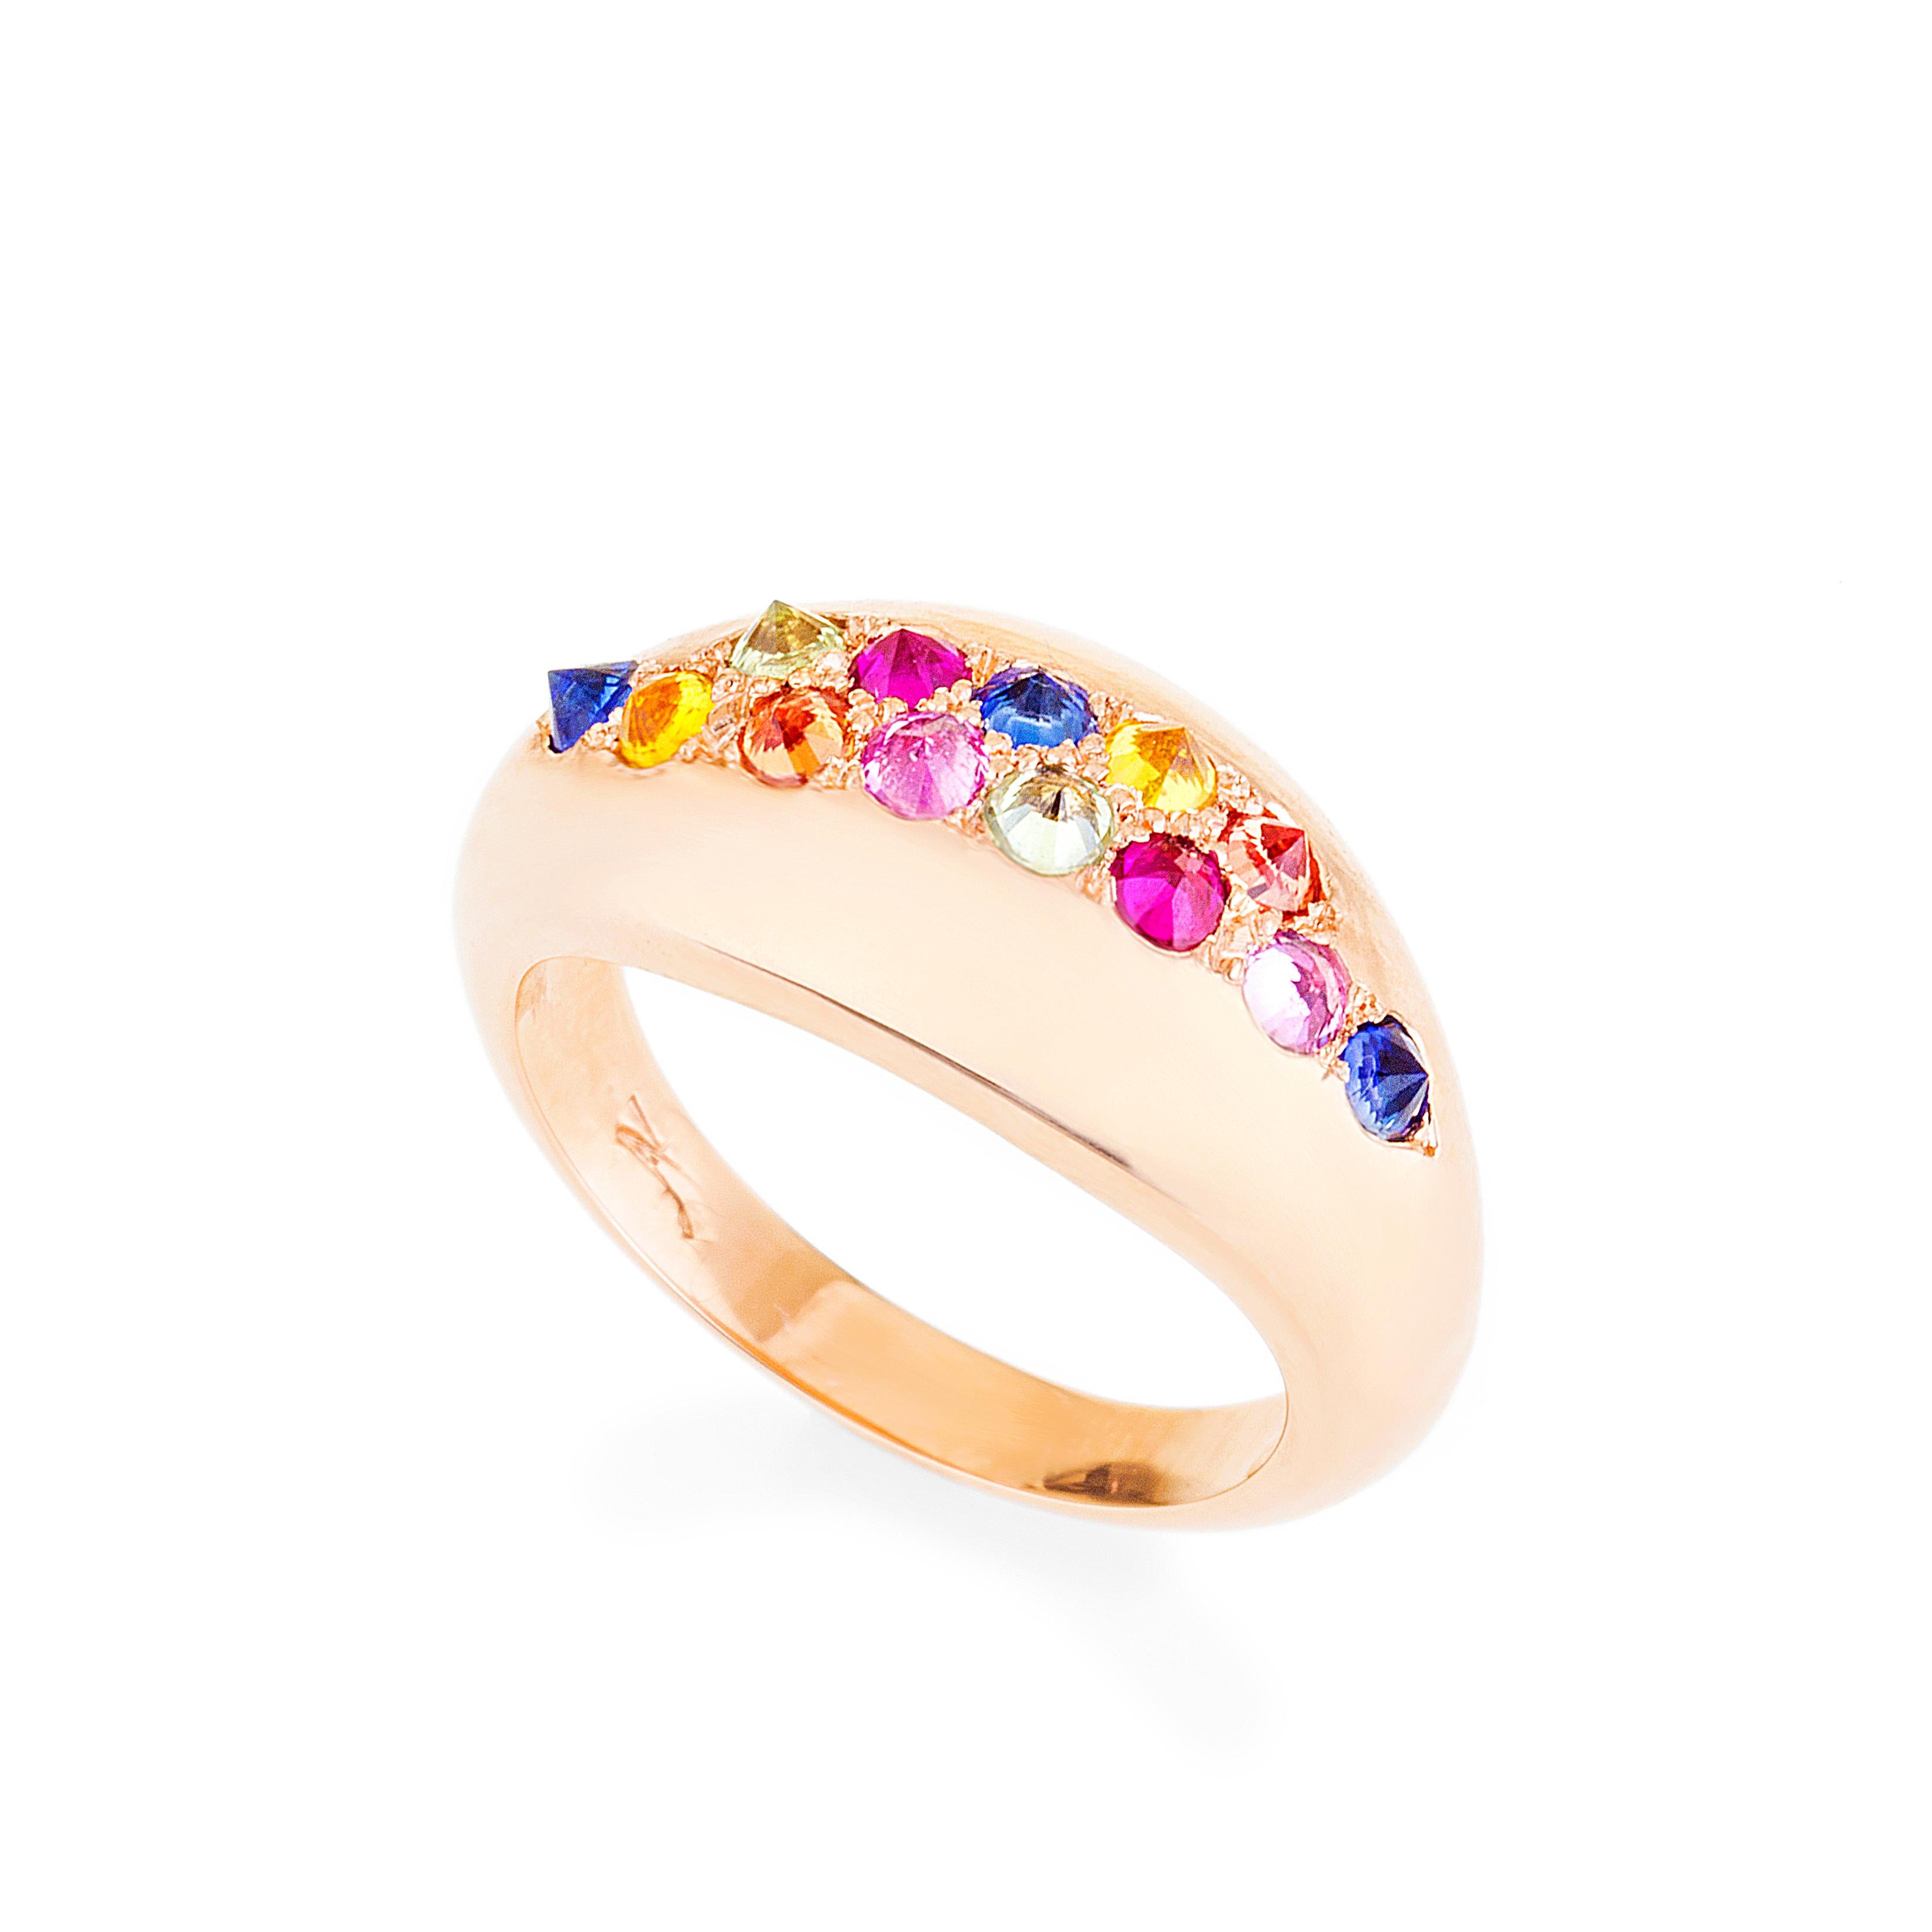 The rose gold dome of the 'Sugar in my Bowl' ring glitters with an inverted sparkling rainbow of sapphires. This sexy ring can be worn alone or stacked with another ring. A perfect minimal statement piece that will become a personal favorite to be